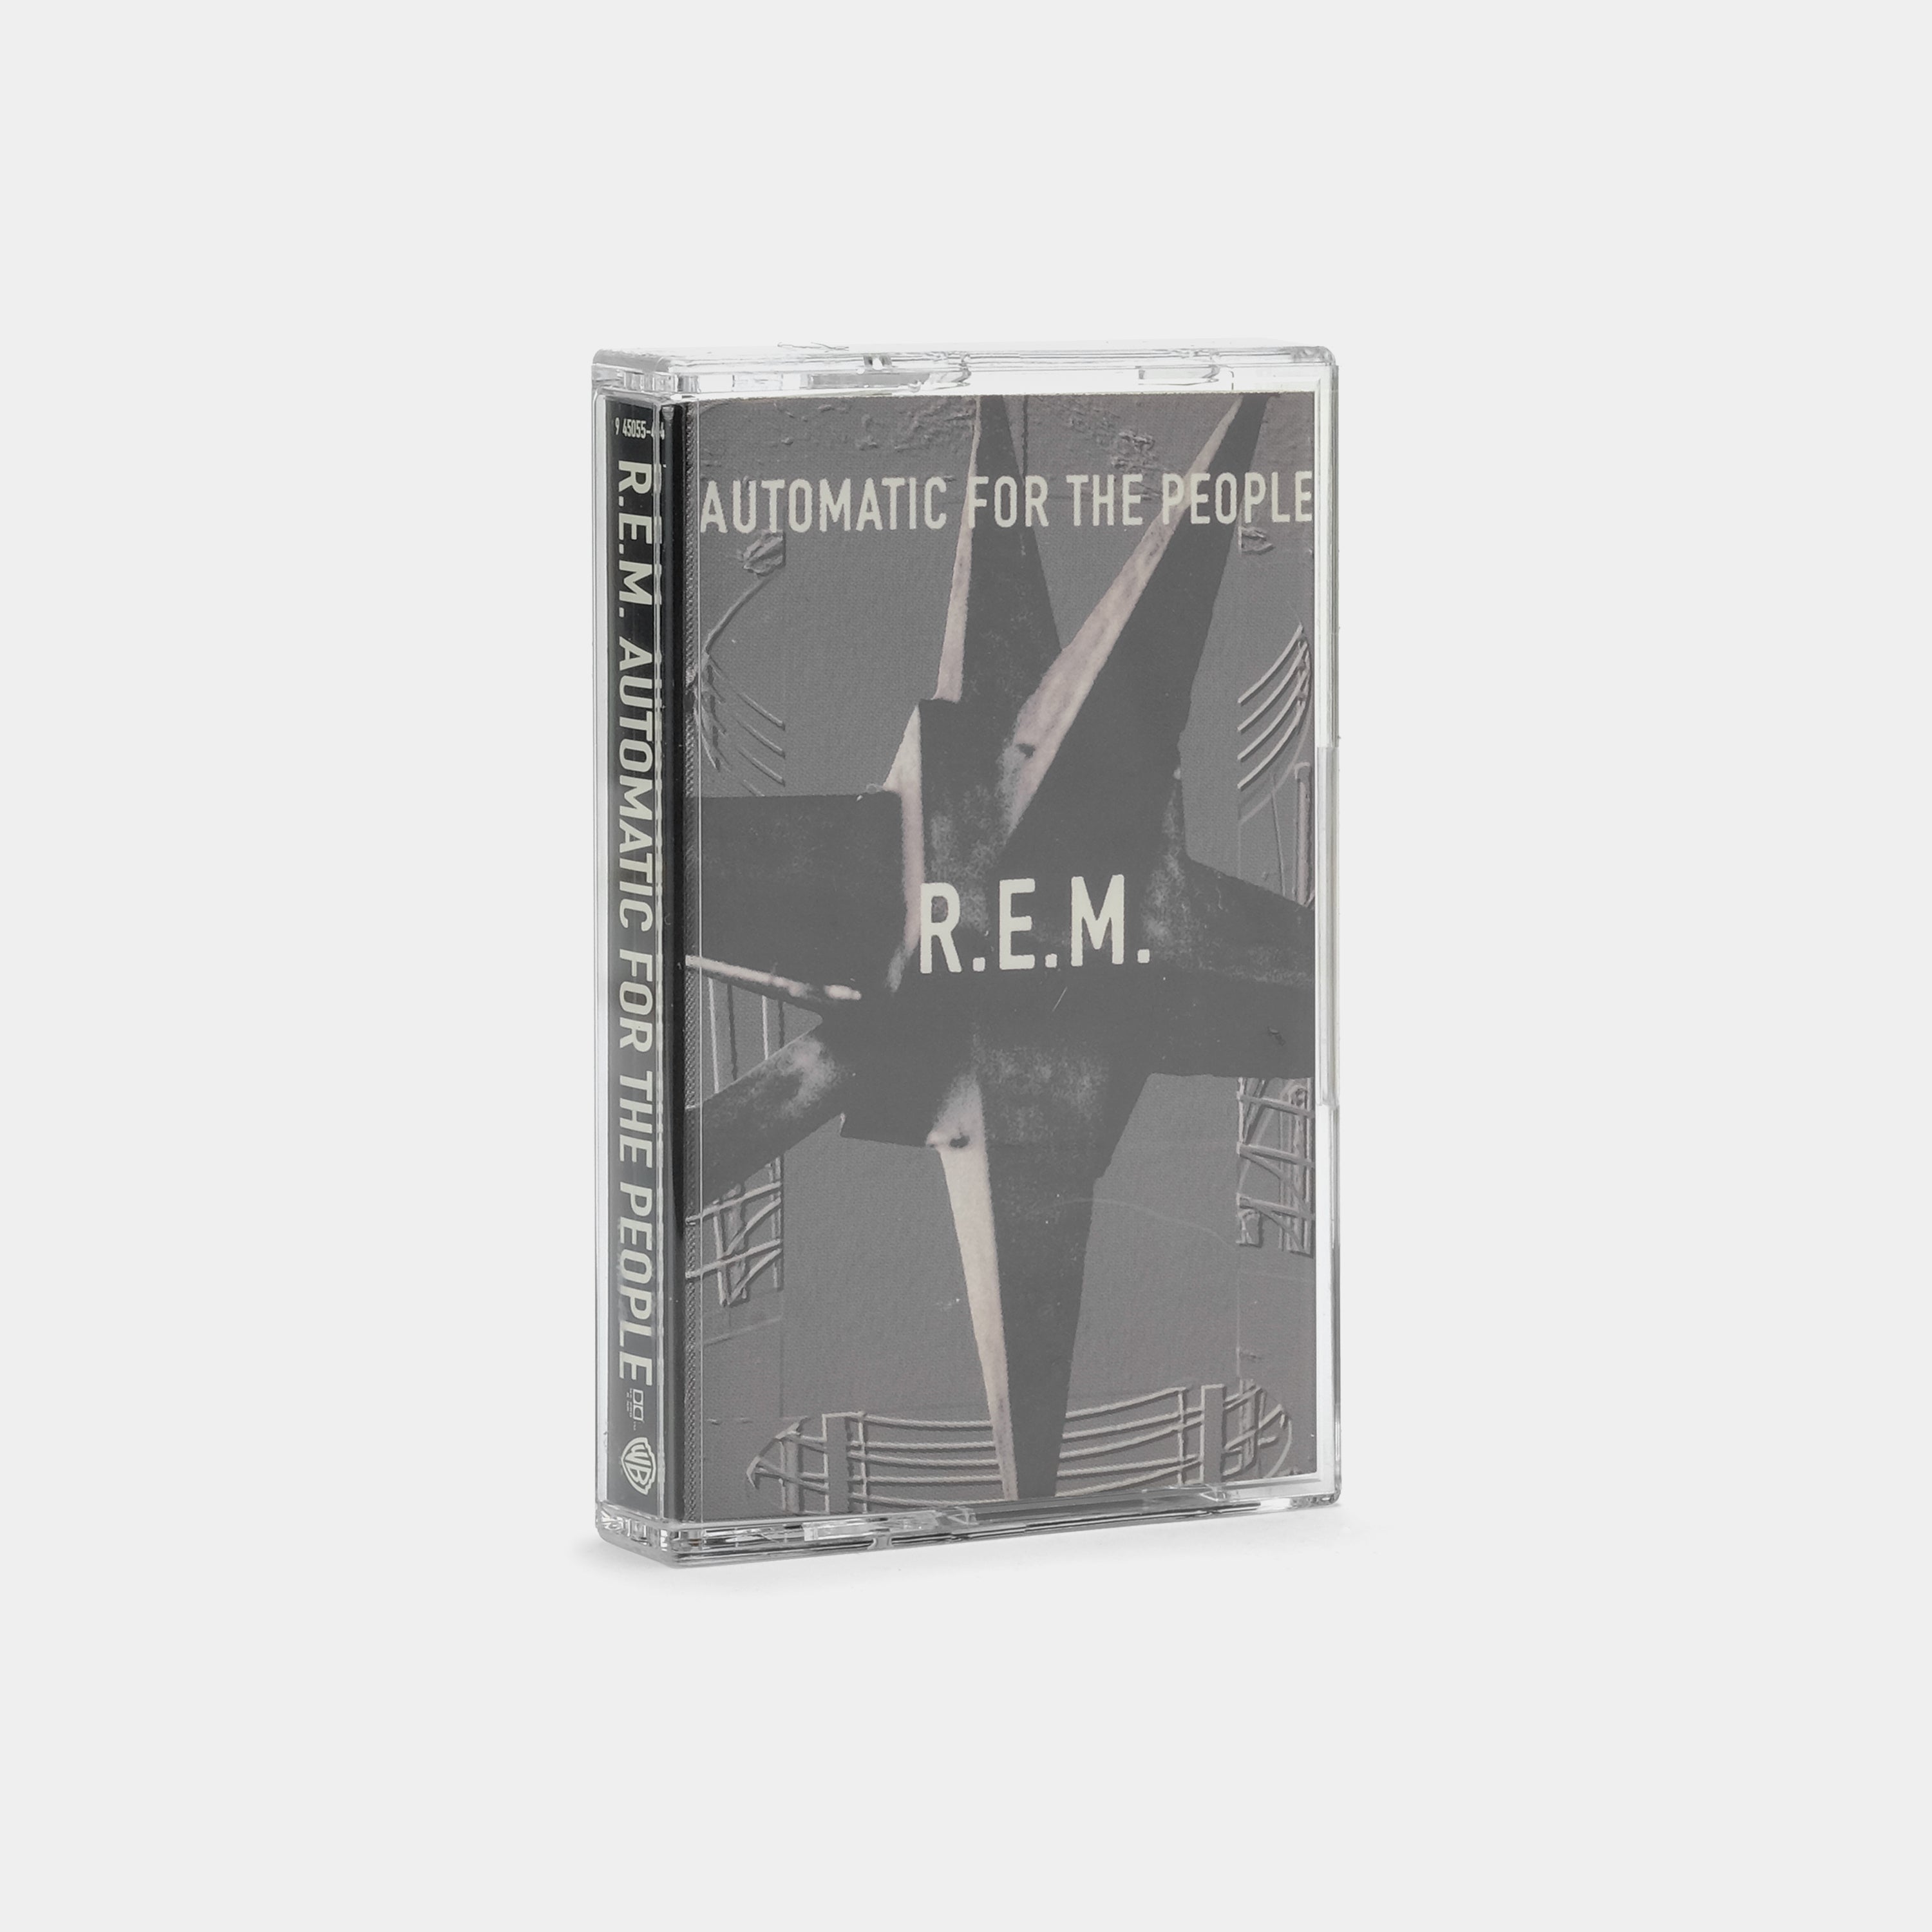 R.E.M. - Automatic For The People Cassette Tape